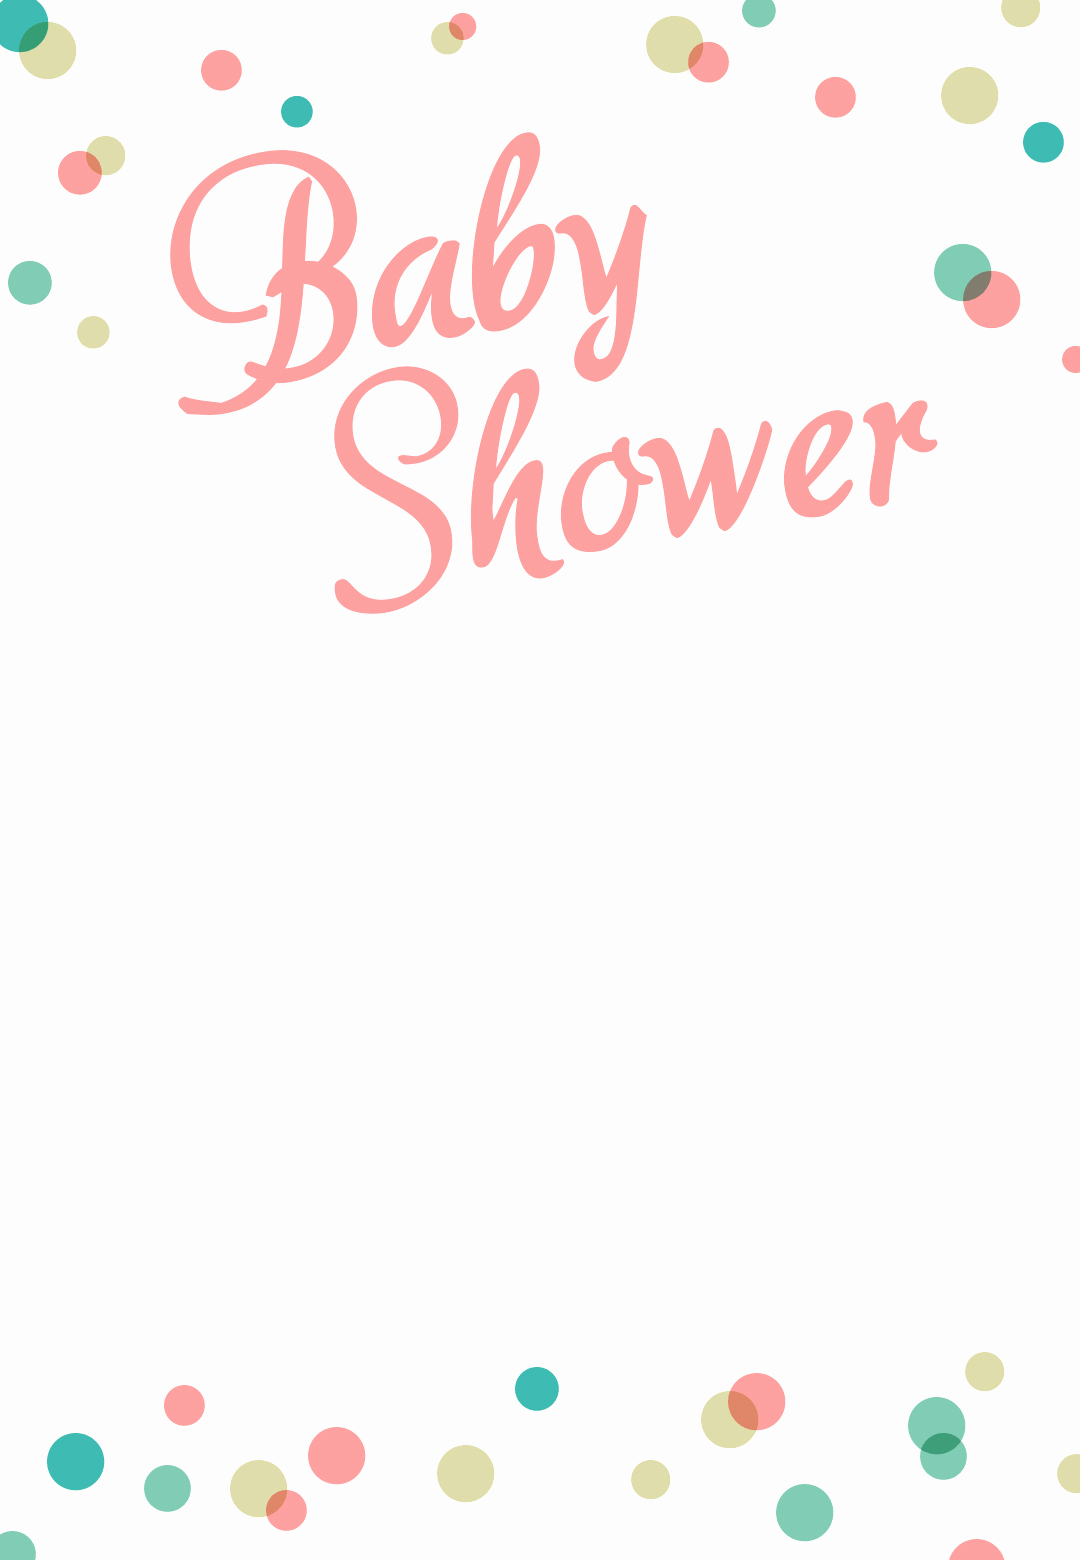 Baby Shower Invite Template Beautiful Dancing Dots Borders Free Printable Baby Shower